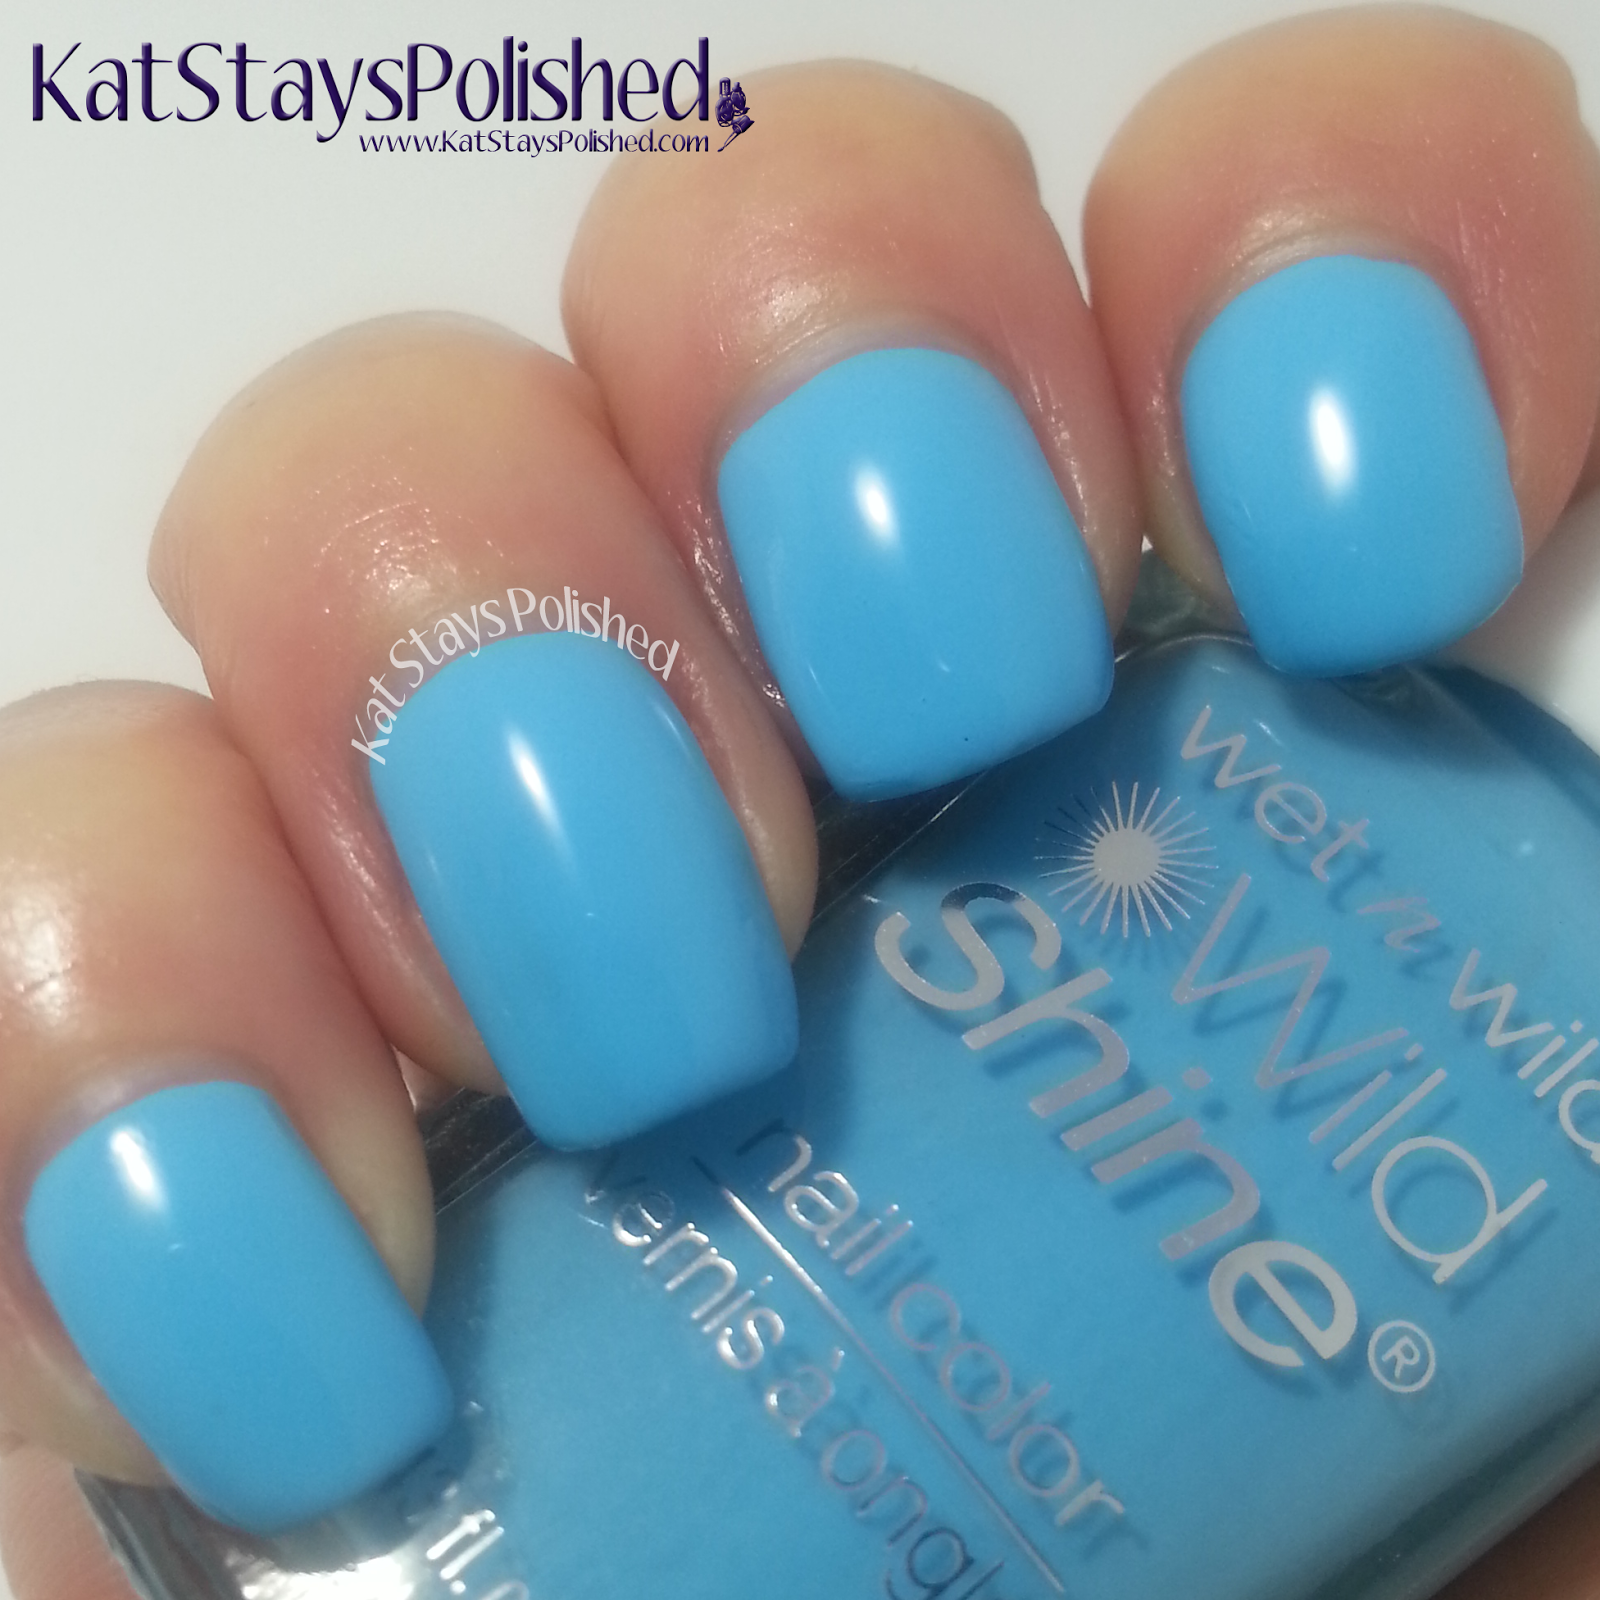 Wet n Wild Summer Festival Nail Color - Chambray Showers | Kat Stays Polished